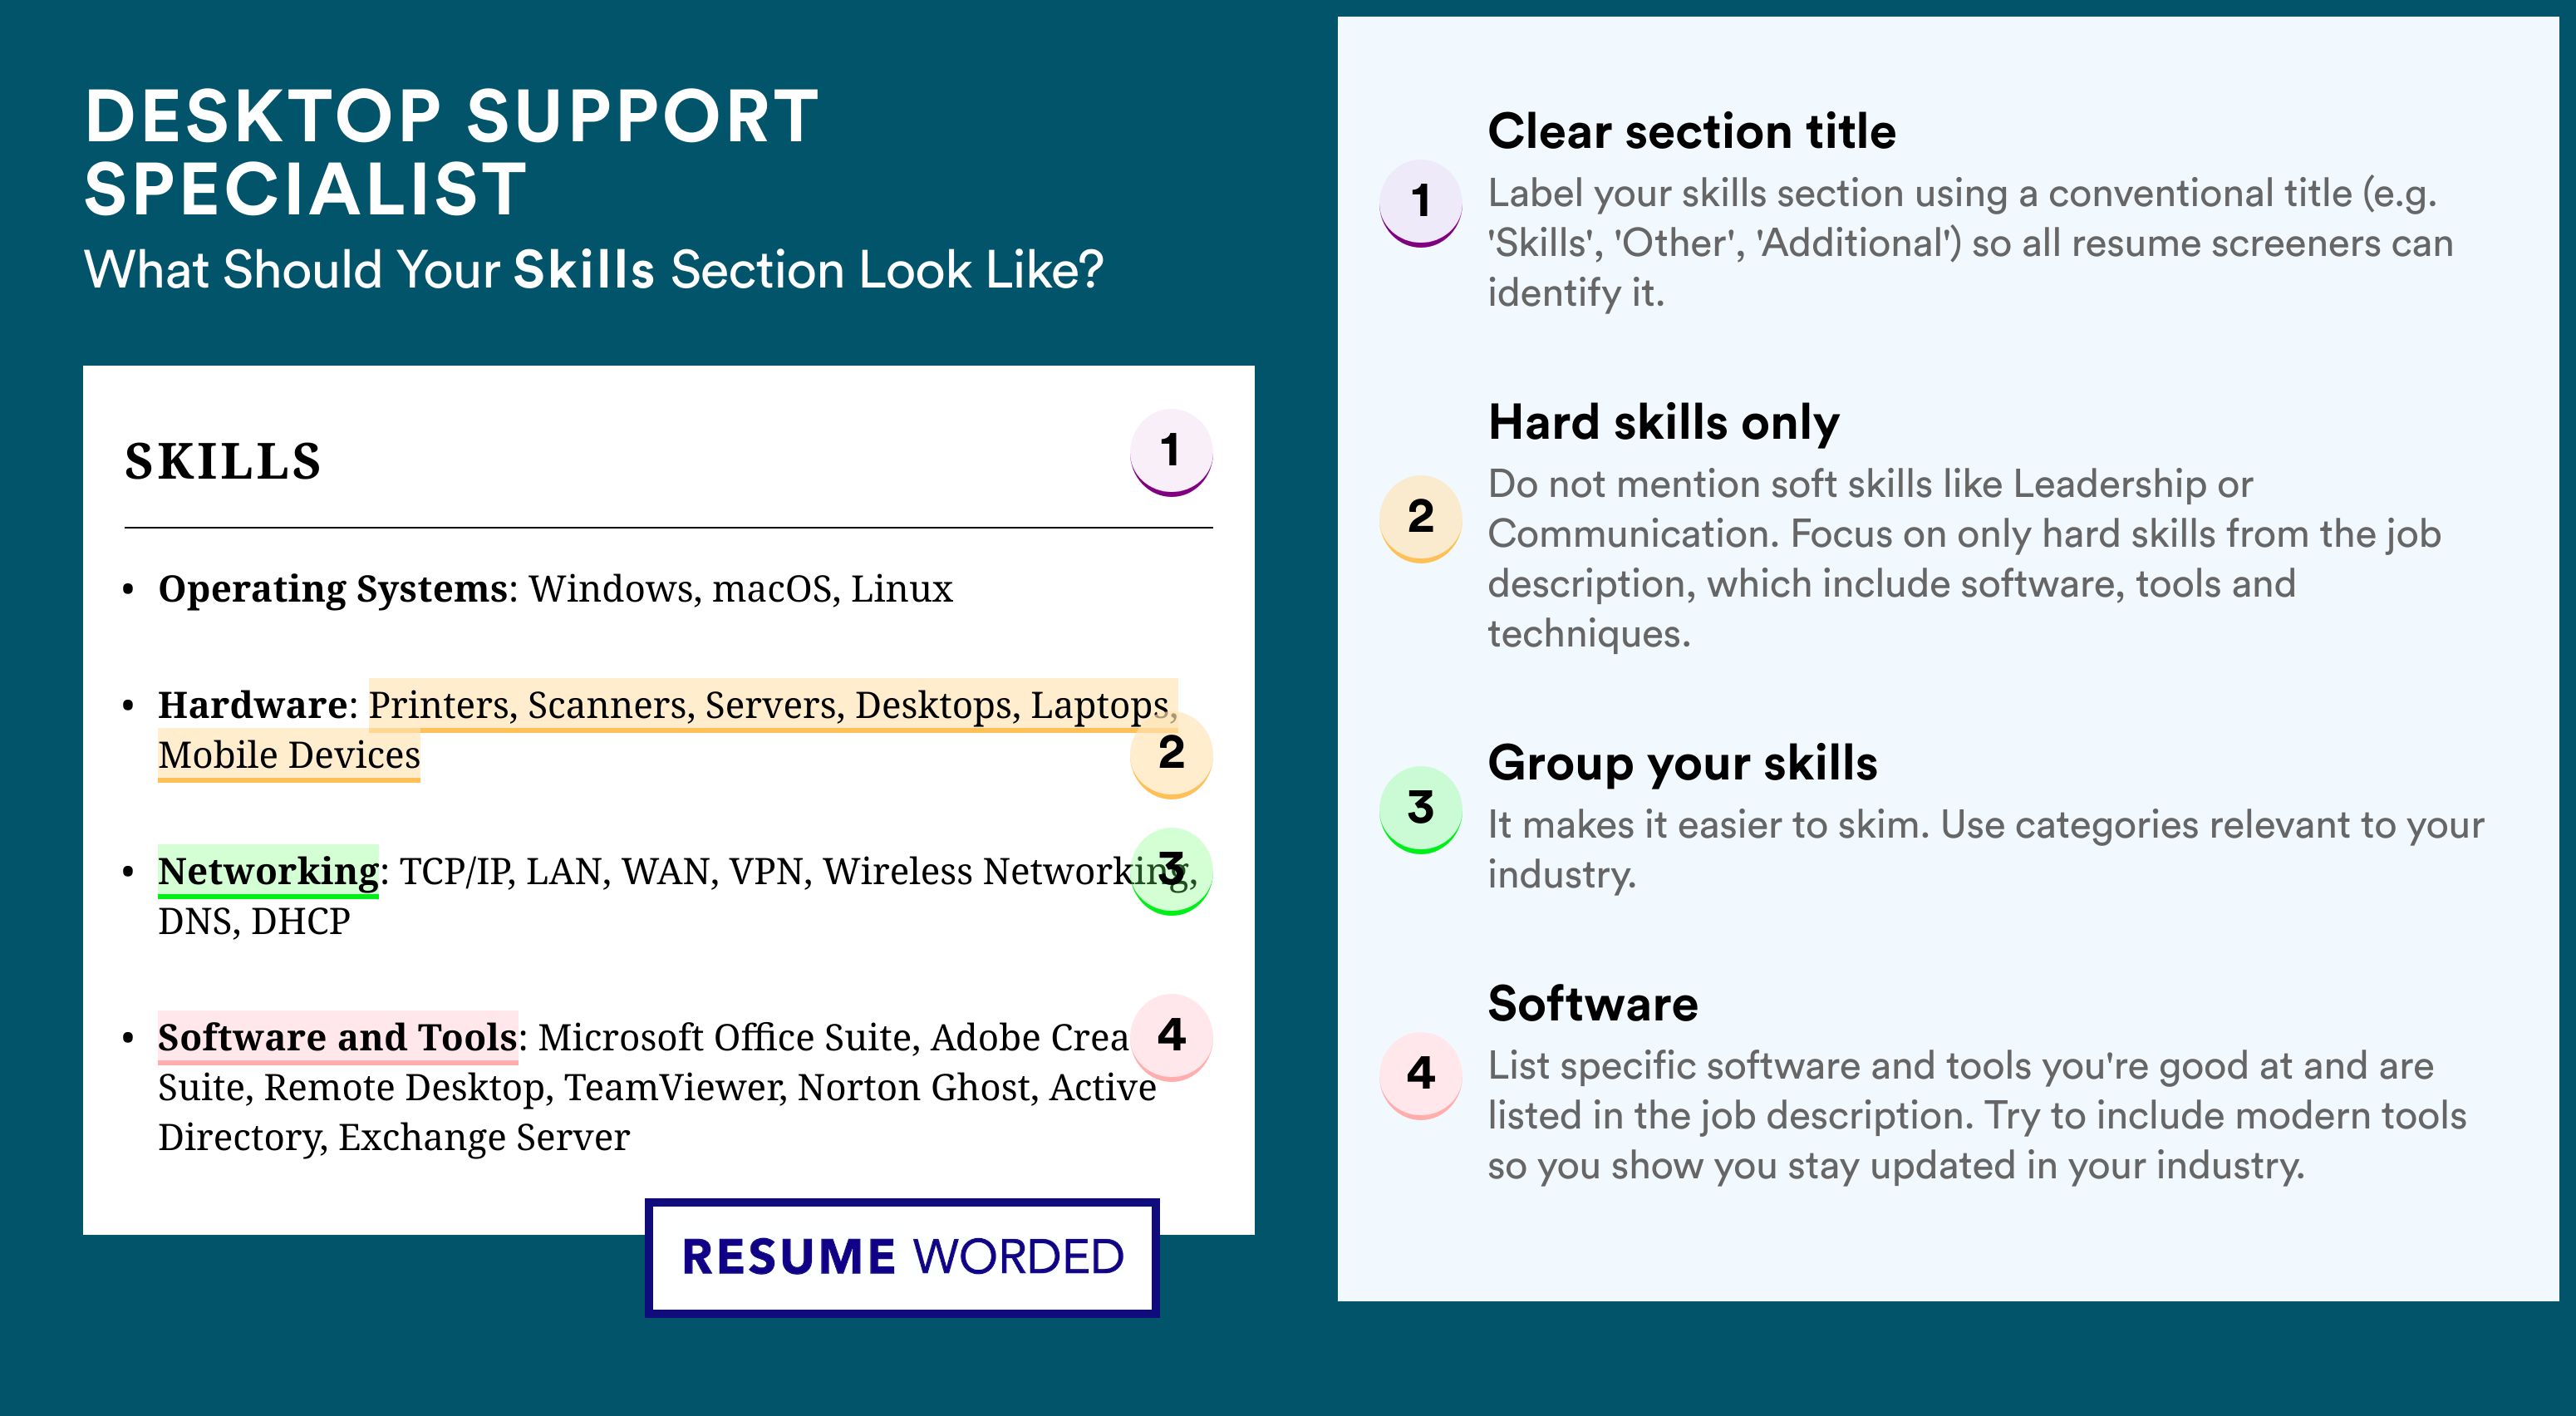 How To Write Your Skills Section - Desktop Support Specialist Roles